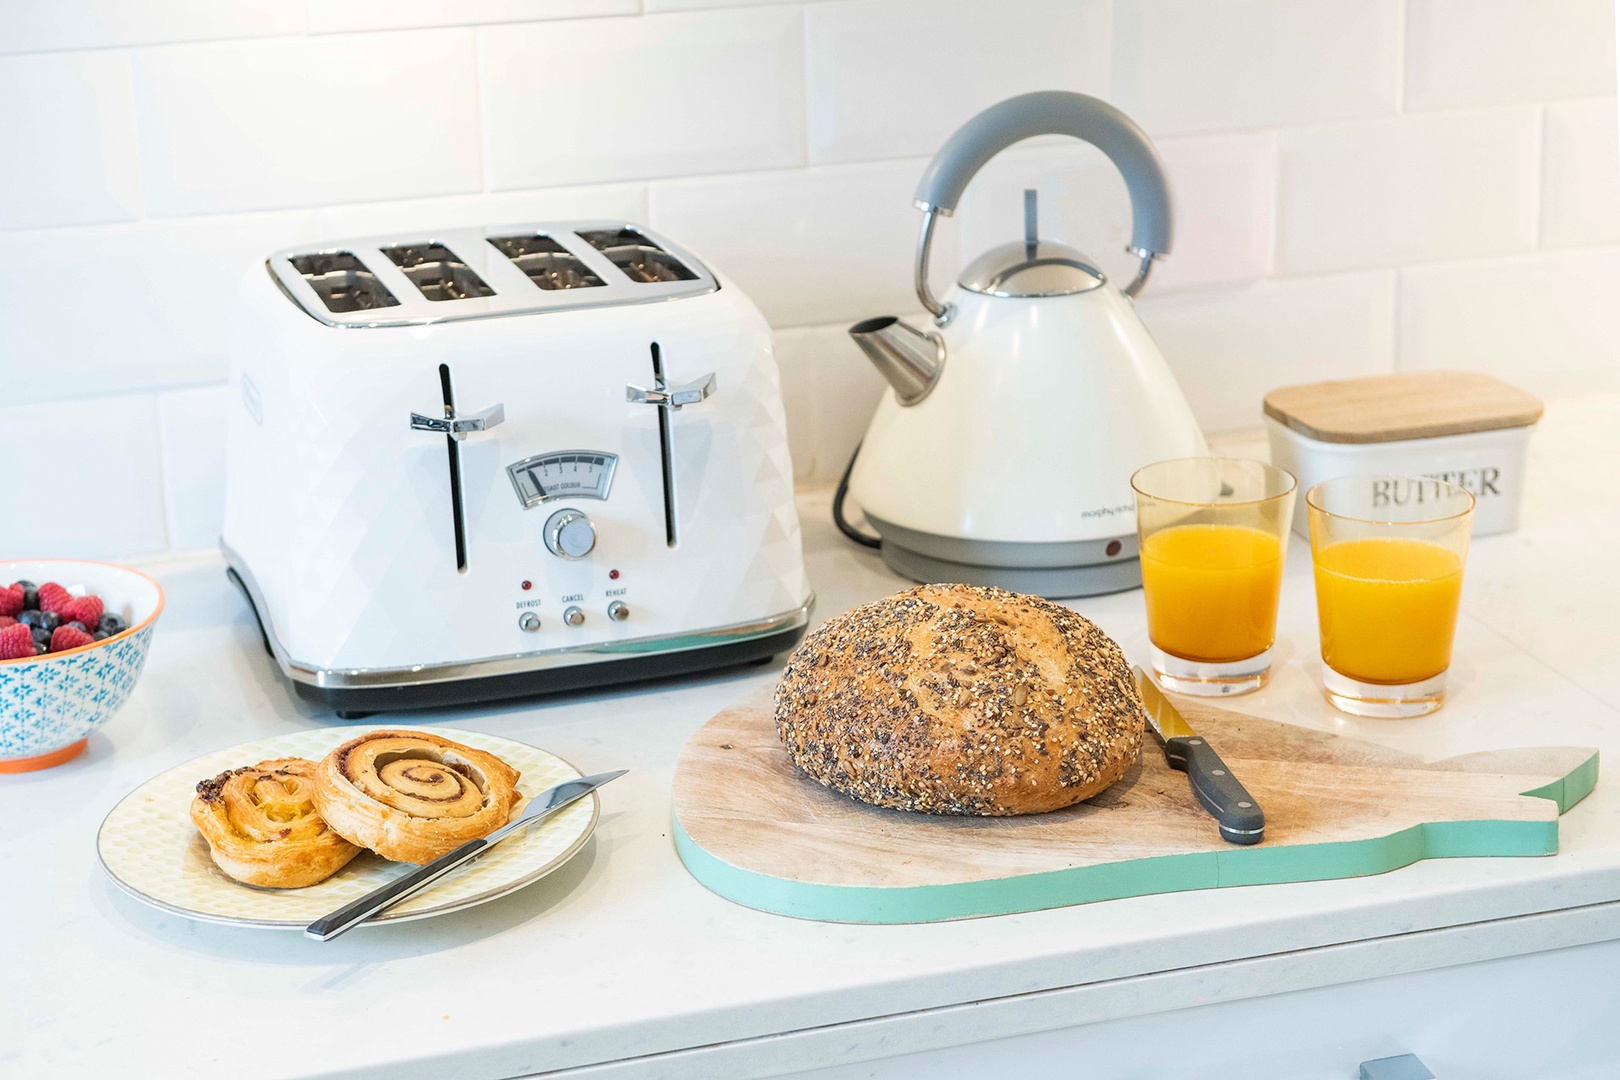 Prepare breakfast at home before a busy day of sightseeing